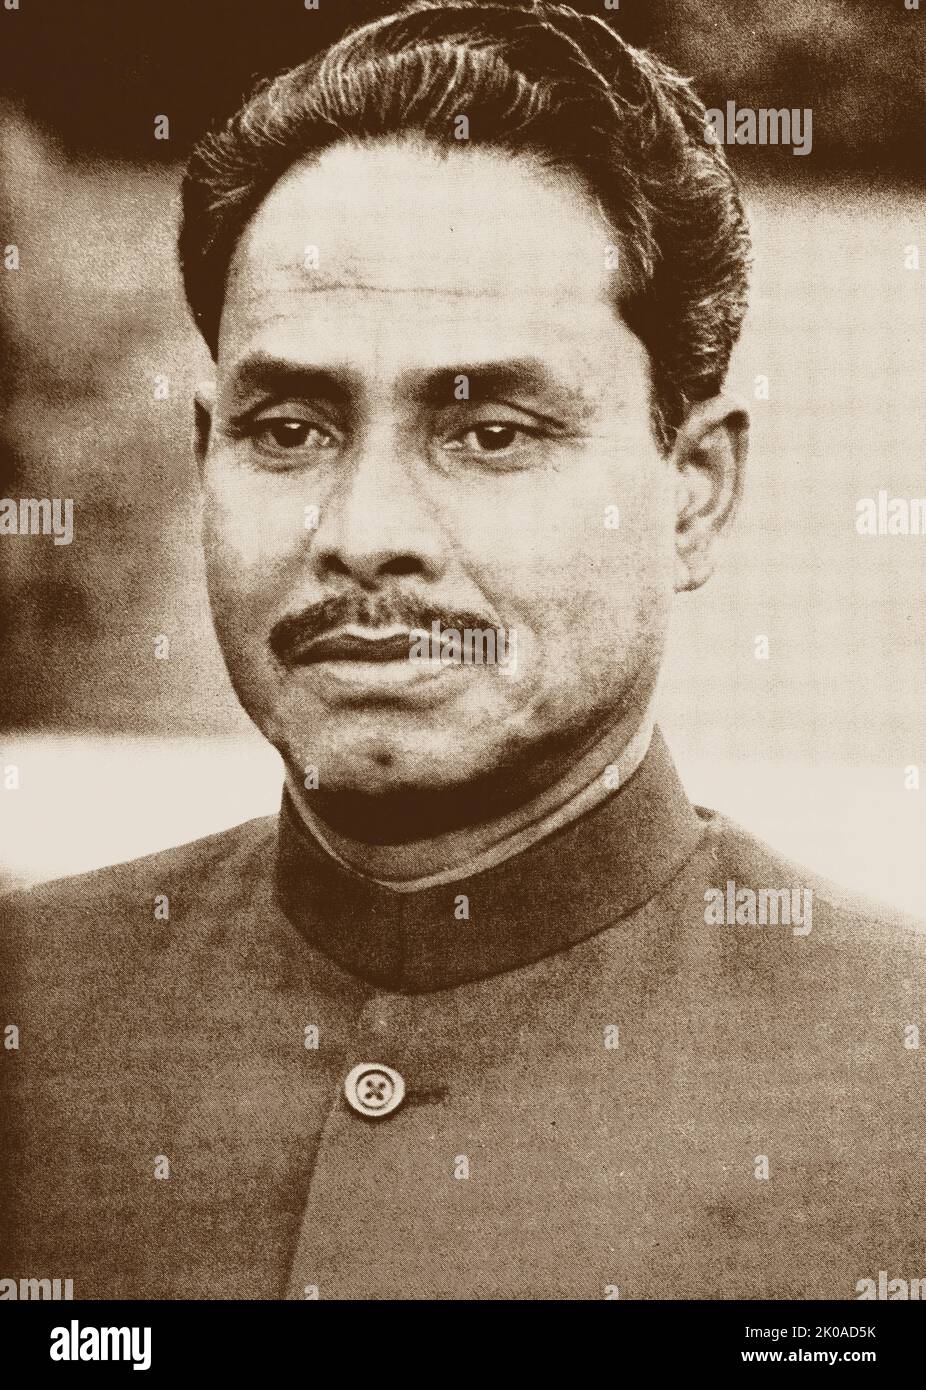 Hussain Muhammad Ershad (1930 - 2019) Bangladeshi Army Chief and politician who served as the President of Bangladesh from 1983 to 1990, a time many consider to have been a military dictatorship Stock Photo